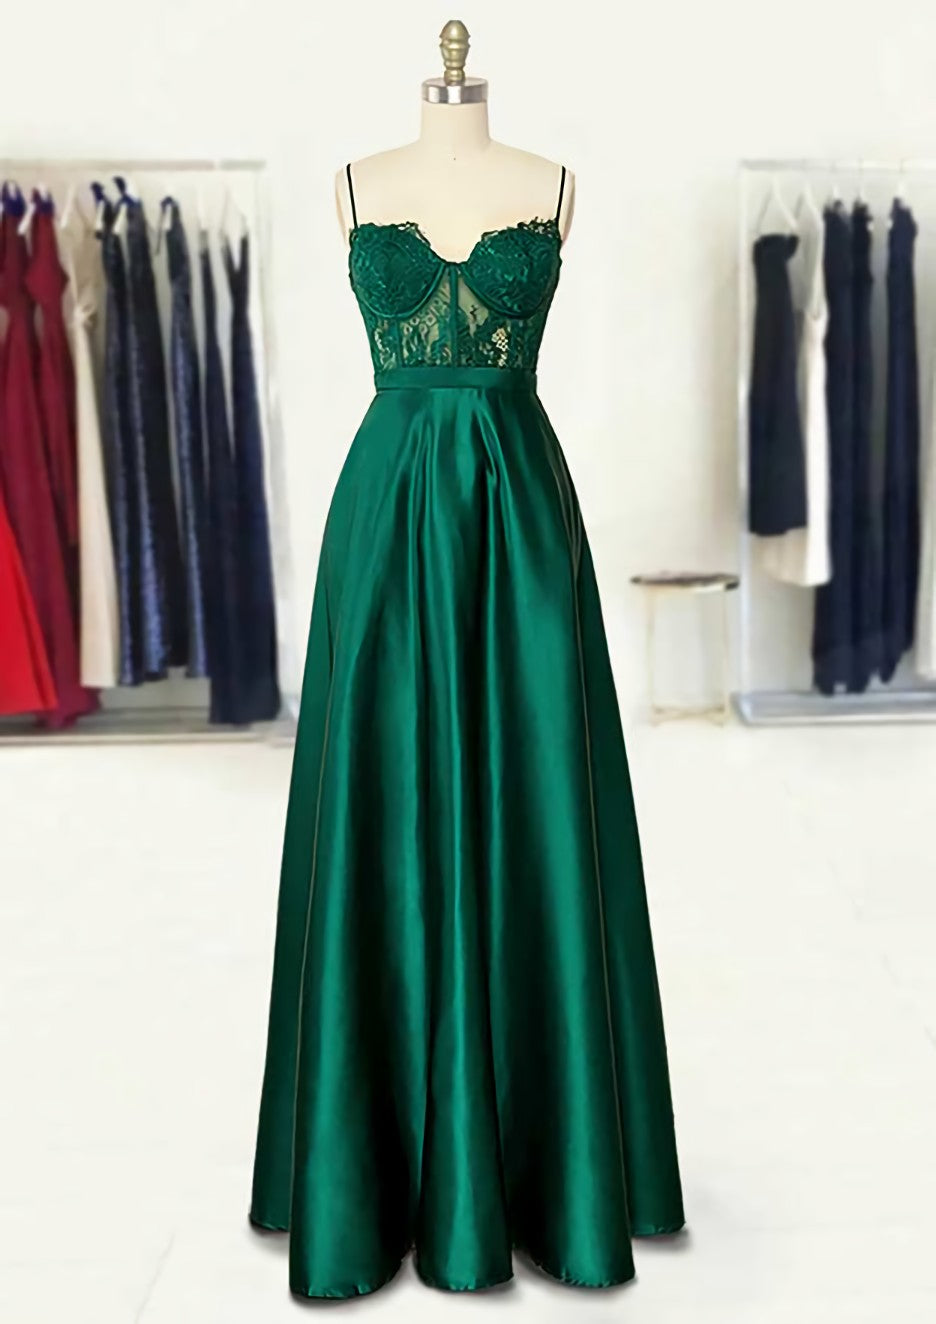 A Line Sweetheart Spaghetti Straps Long Floor Length Satin Prom Dress Outfits For Women With Appliqued Pockets